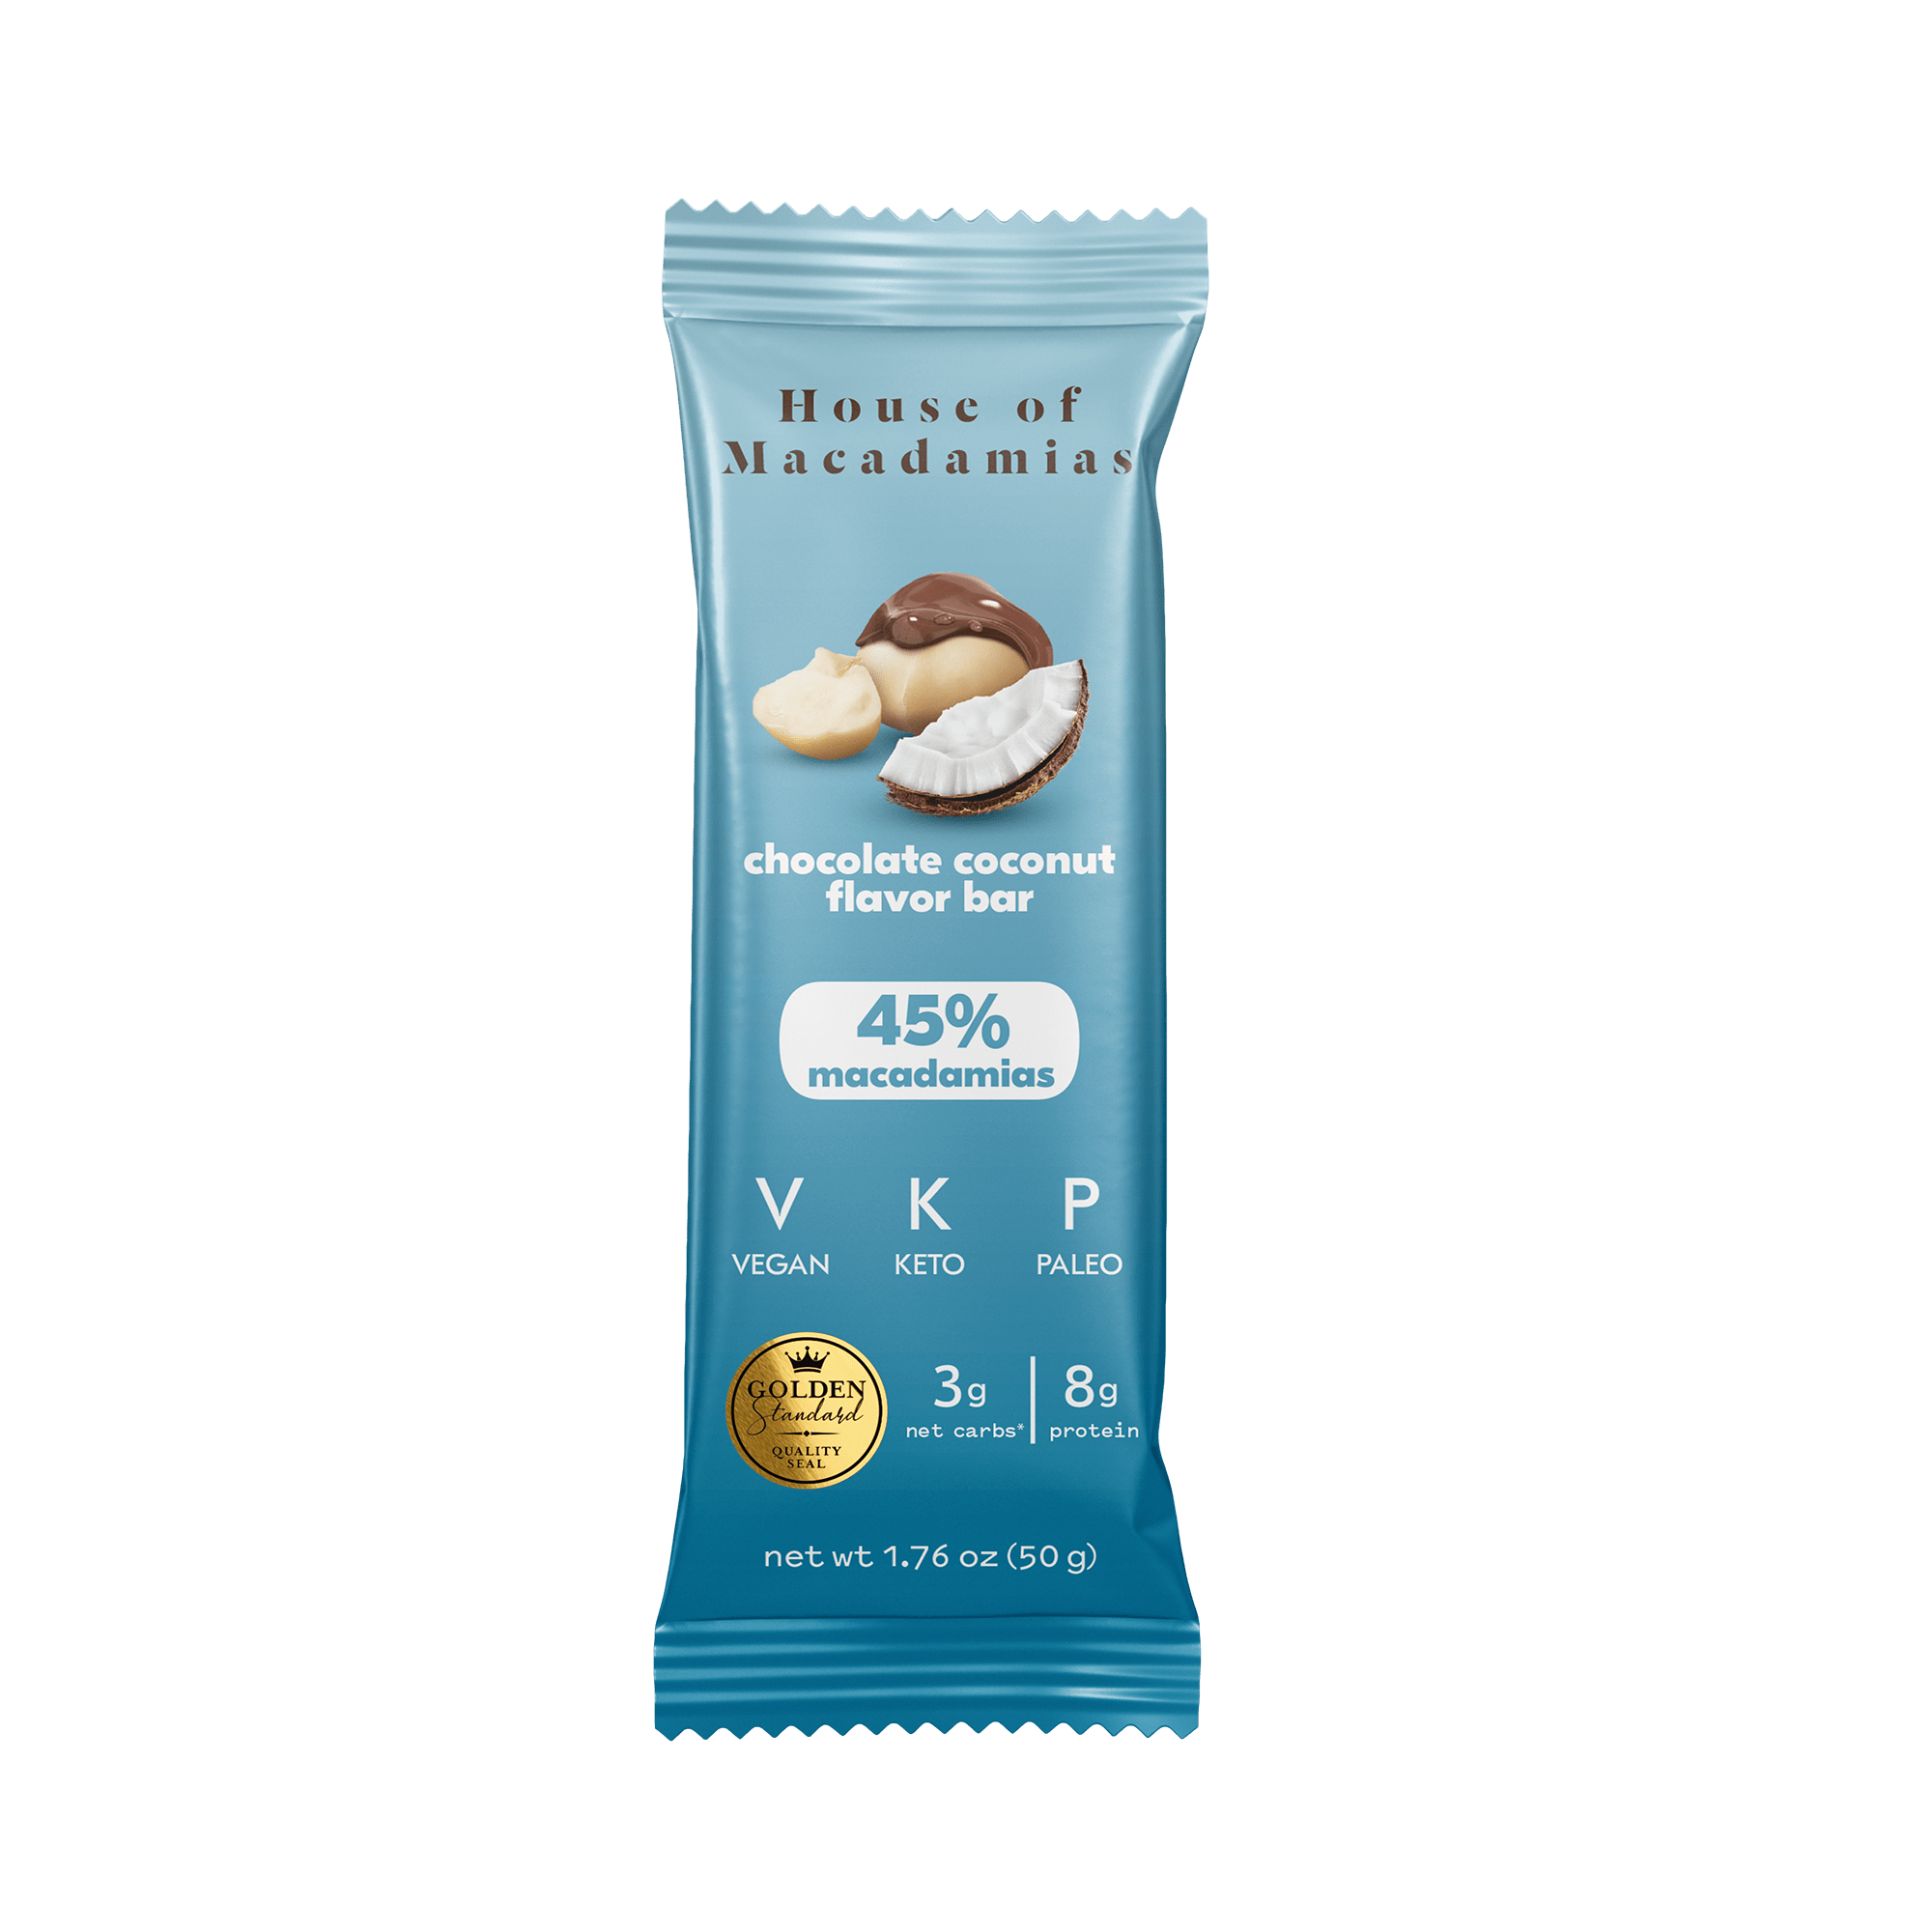 Macadamia Protein Bar Variety Pack (4 Flavors, 12 Bars) - House of Macadamias - good post workout meals